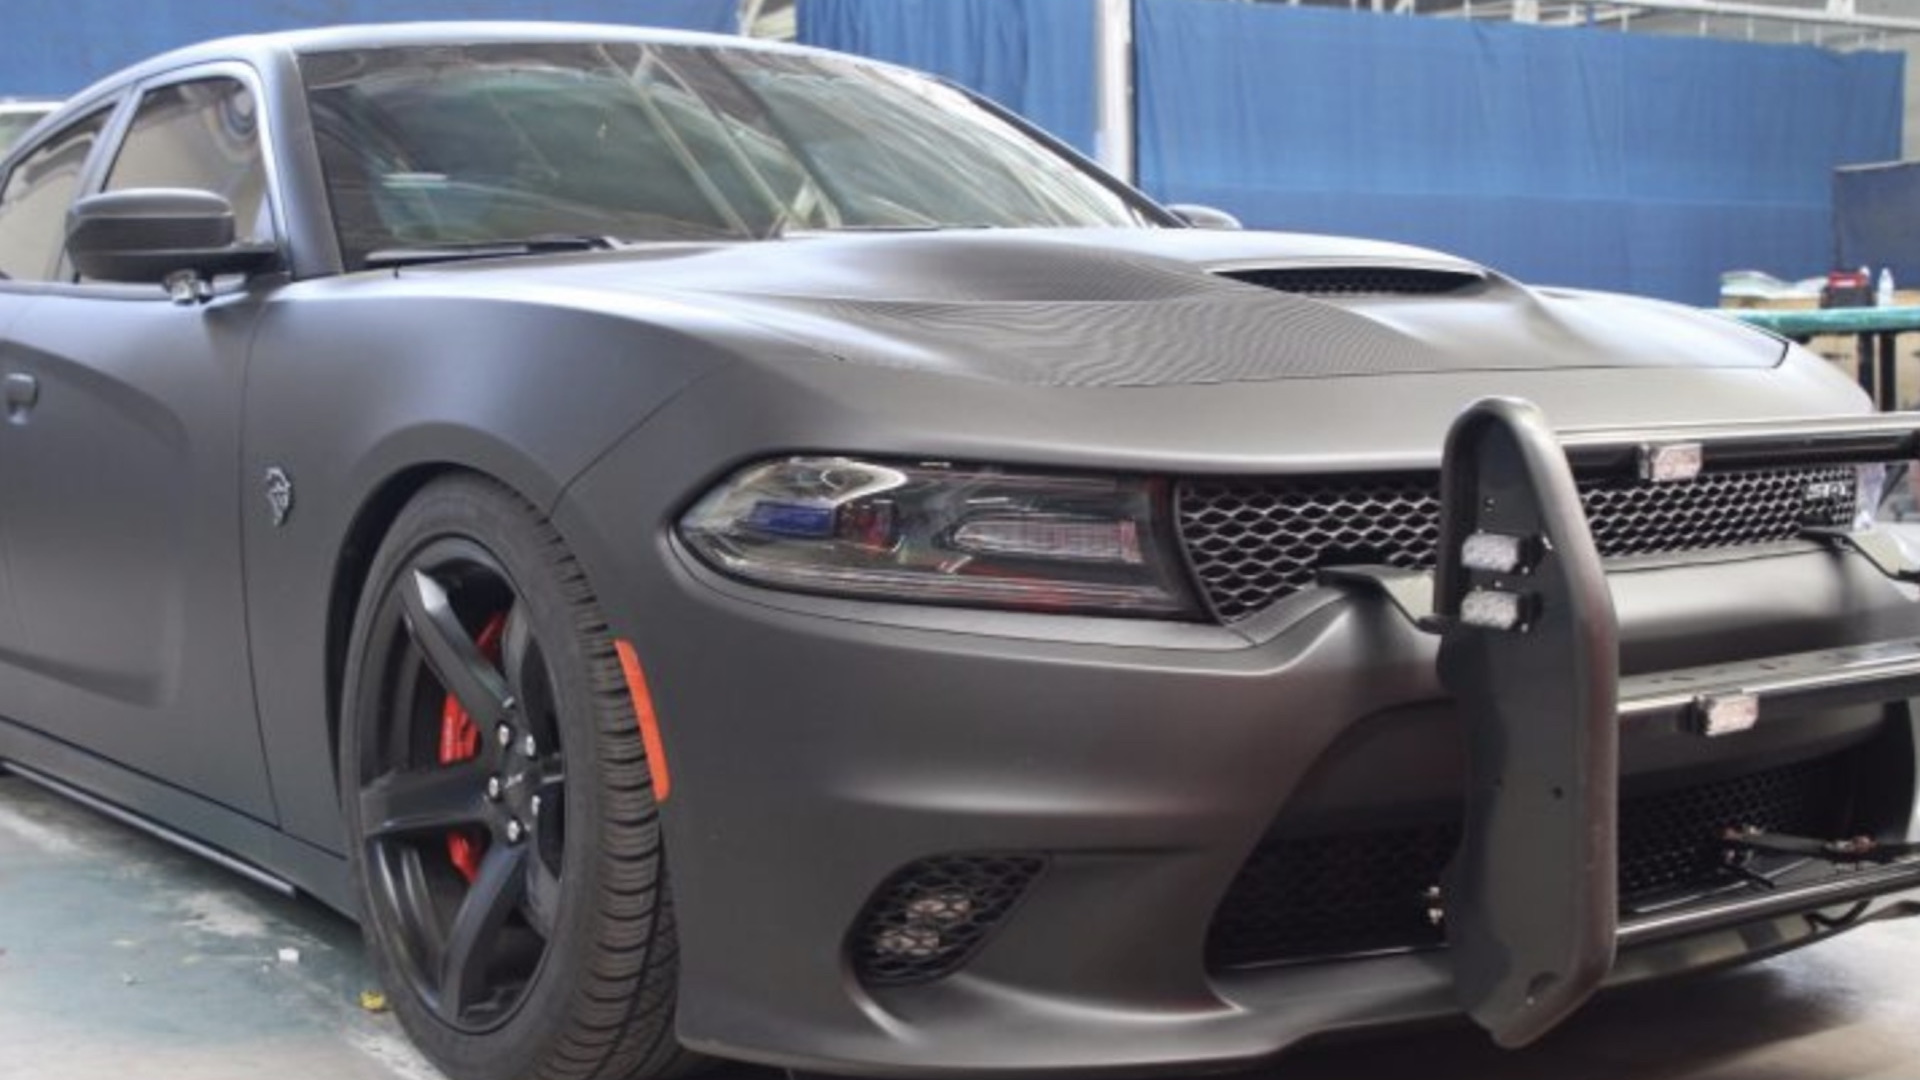 Armormax armored Dodge Charger Hellcat police vehicle